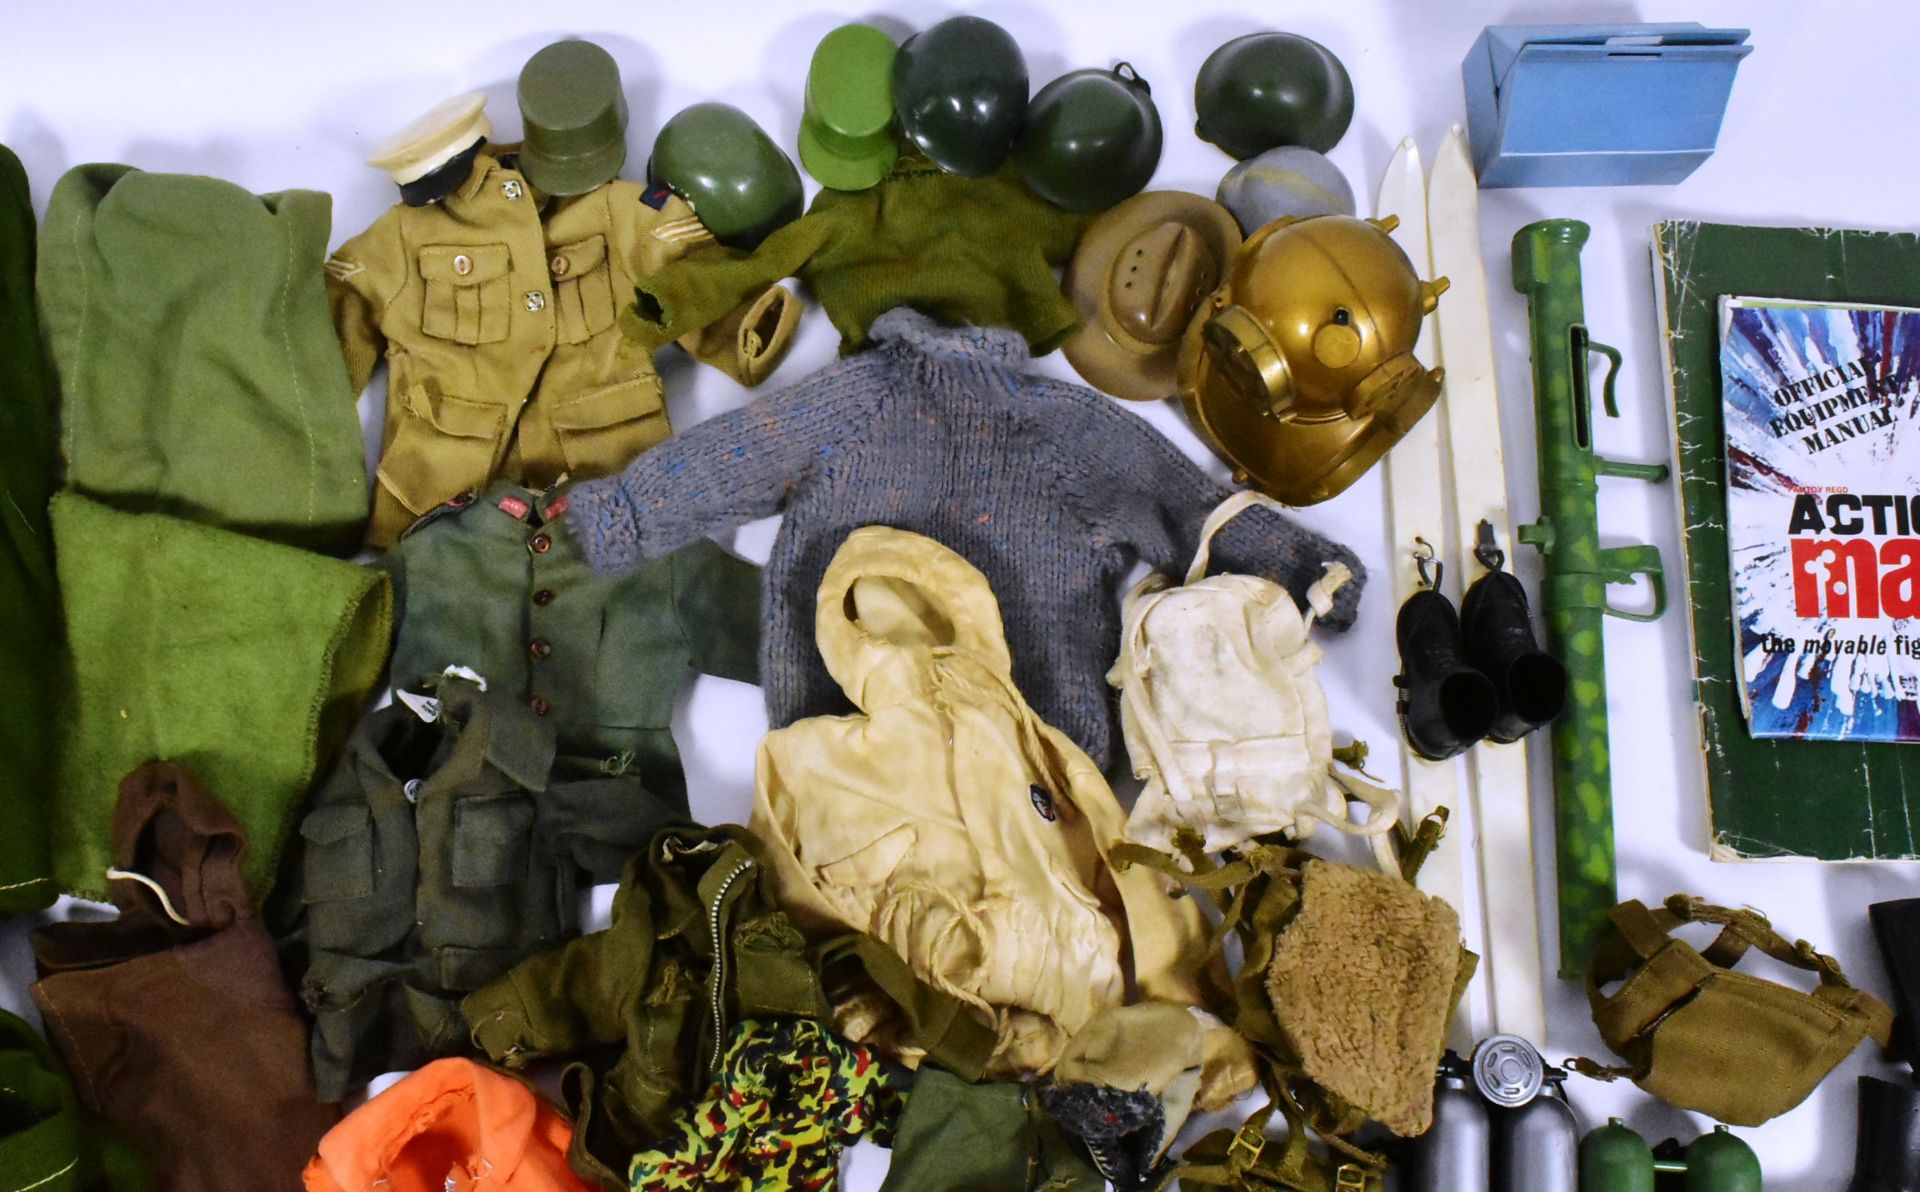 ACTION MAN - PALITOY - COLLECTION OF ACCESSORIES - Bild 5 aus 5